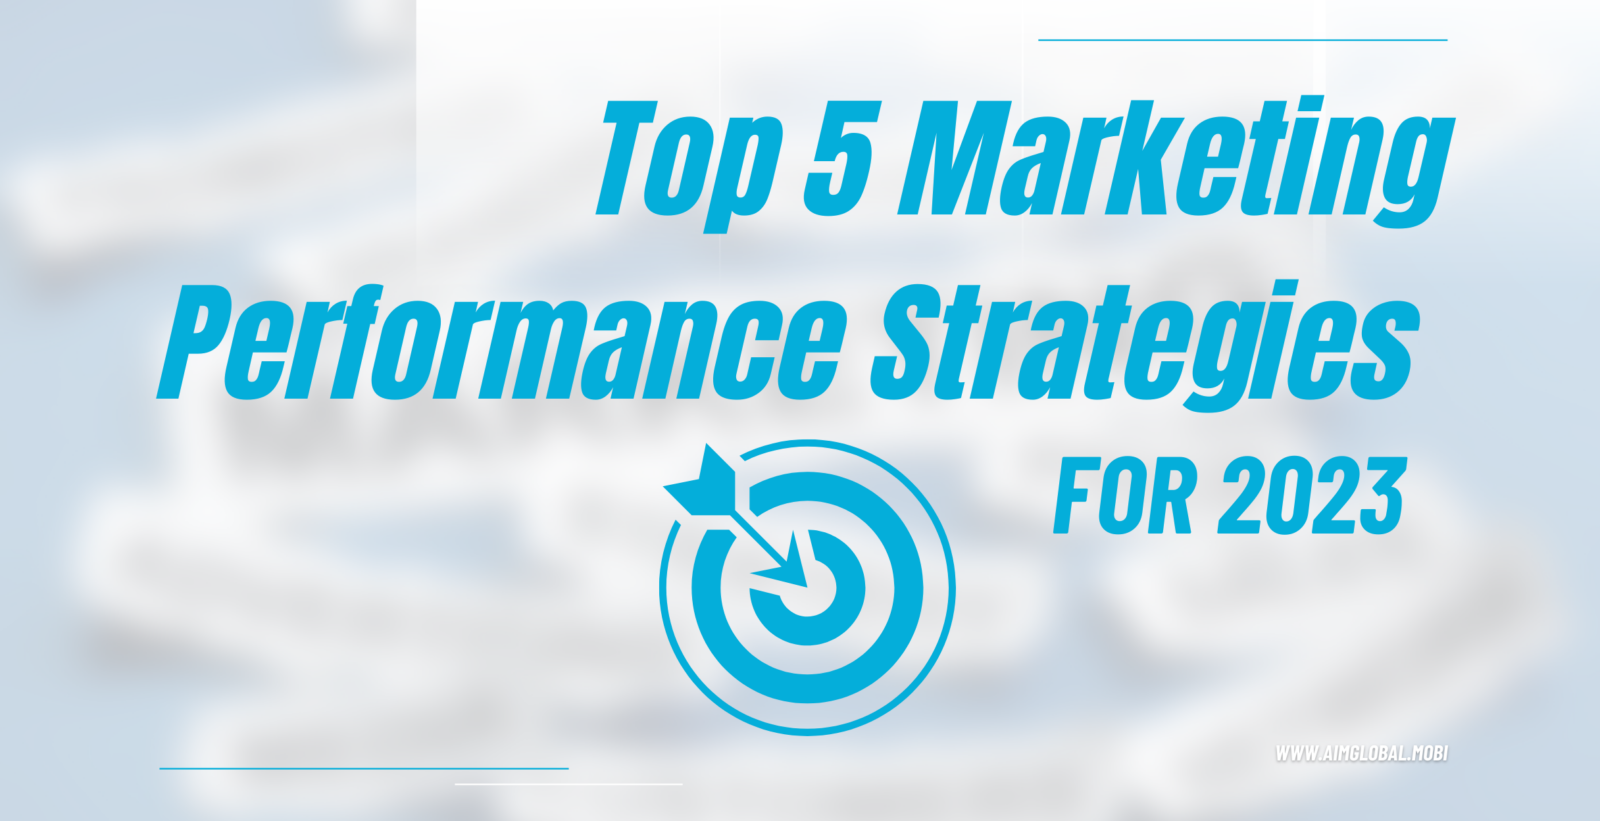 Top 5 Marketing Performance Strategies For 2023